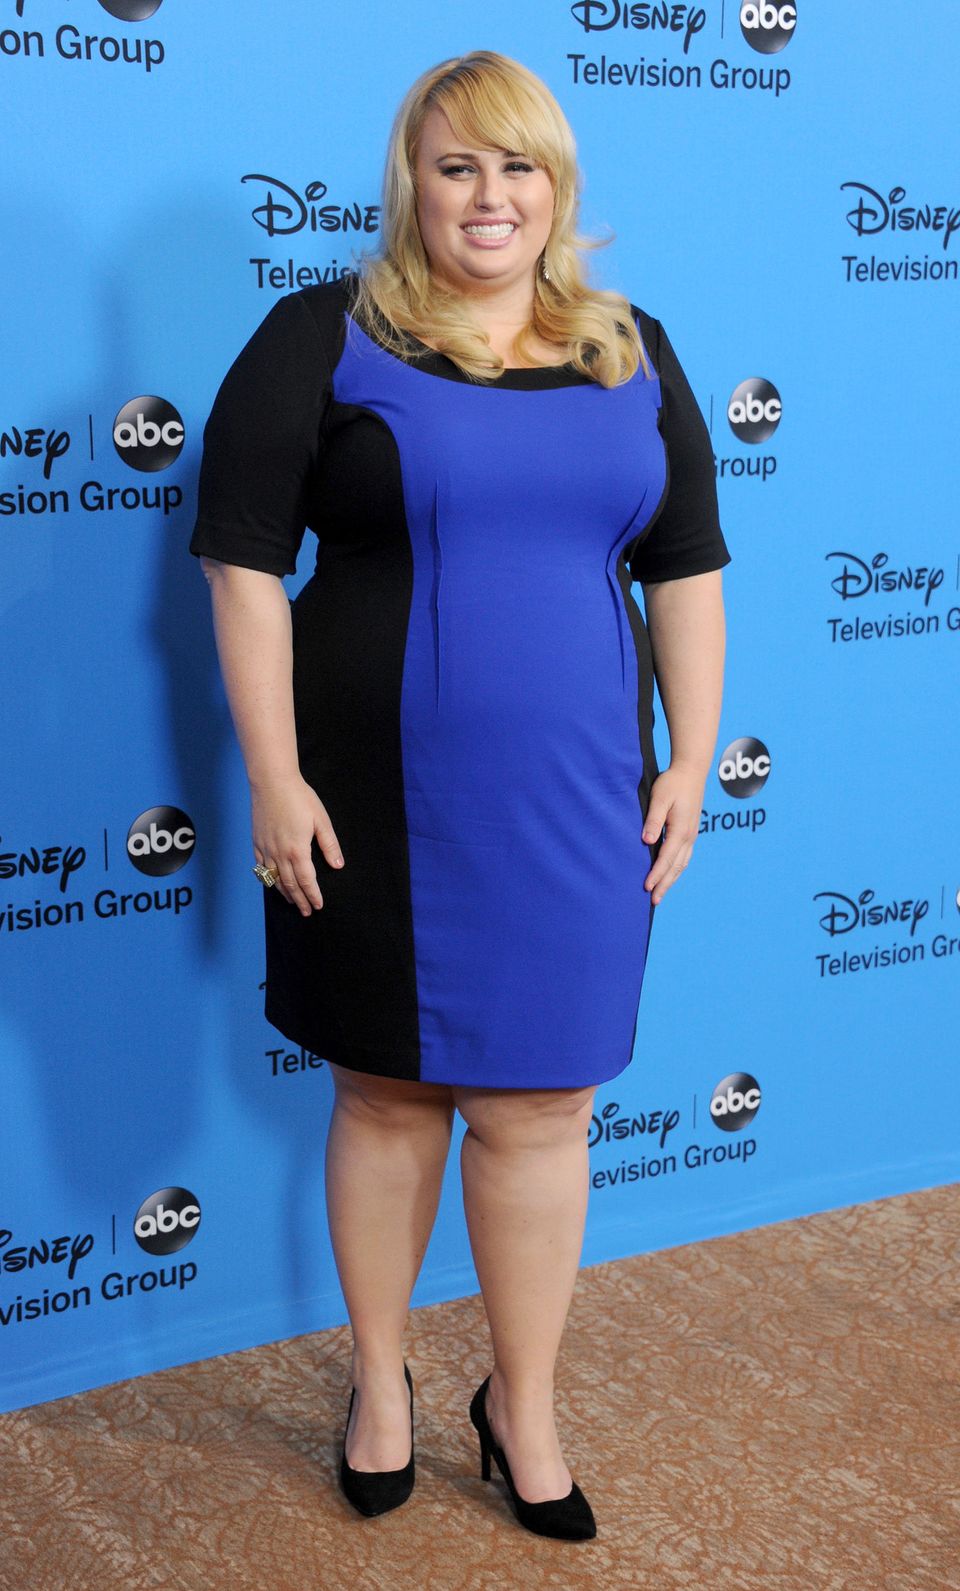 23 Times Rebel Wilson Inspired Us By Being Fly As Hell.